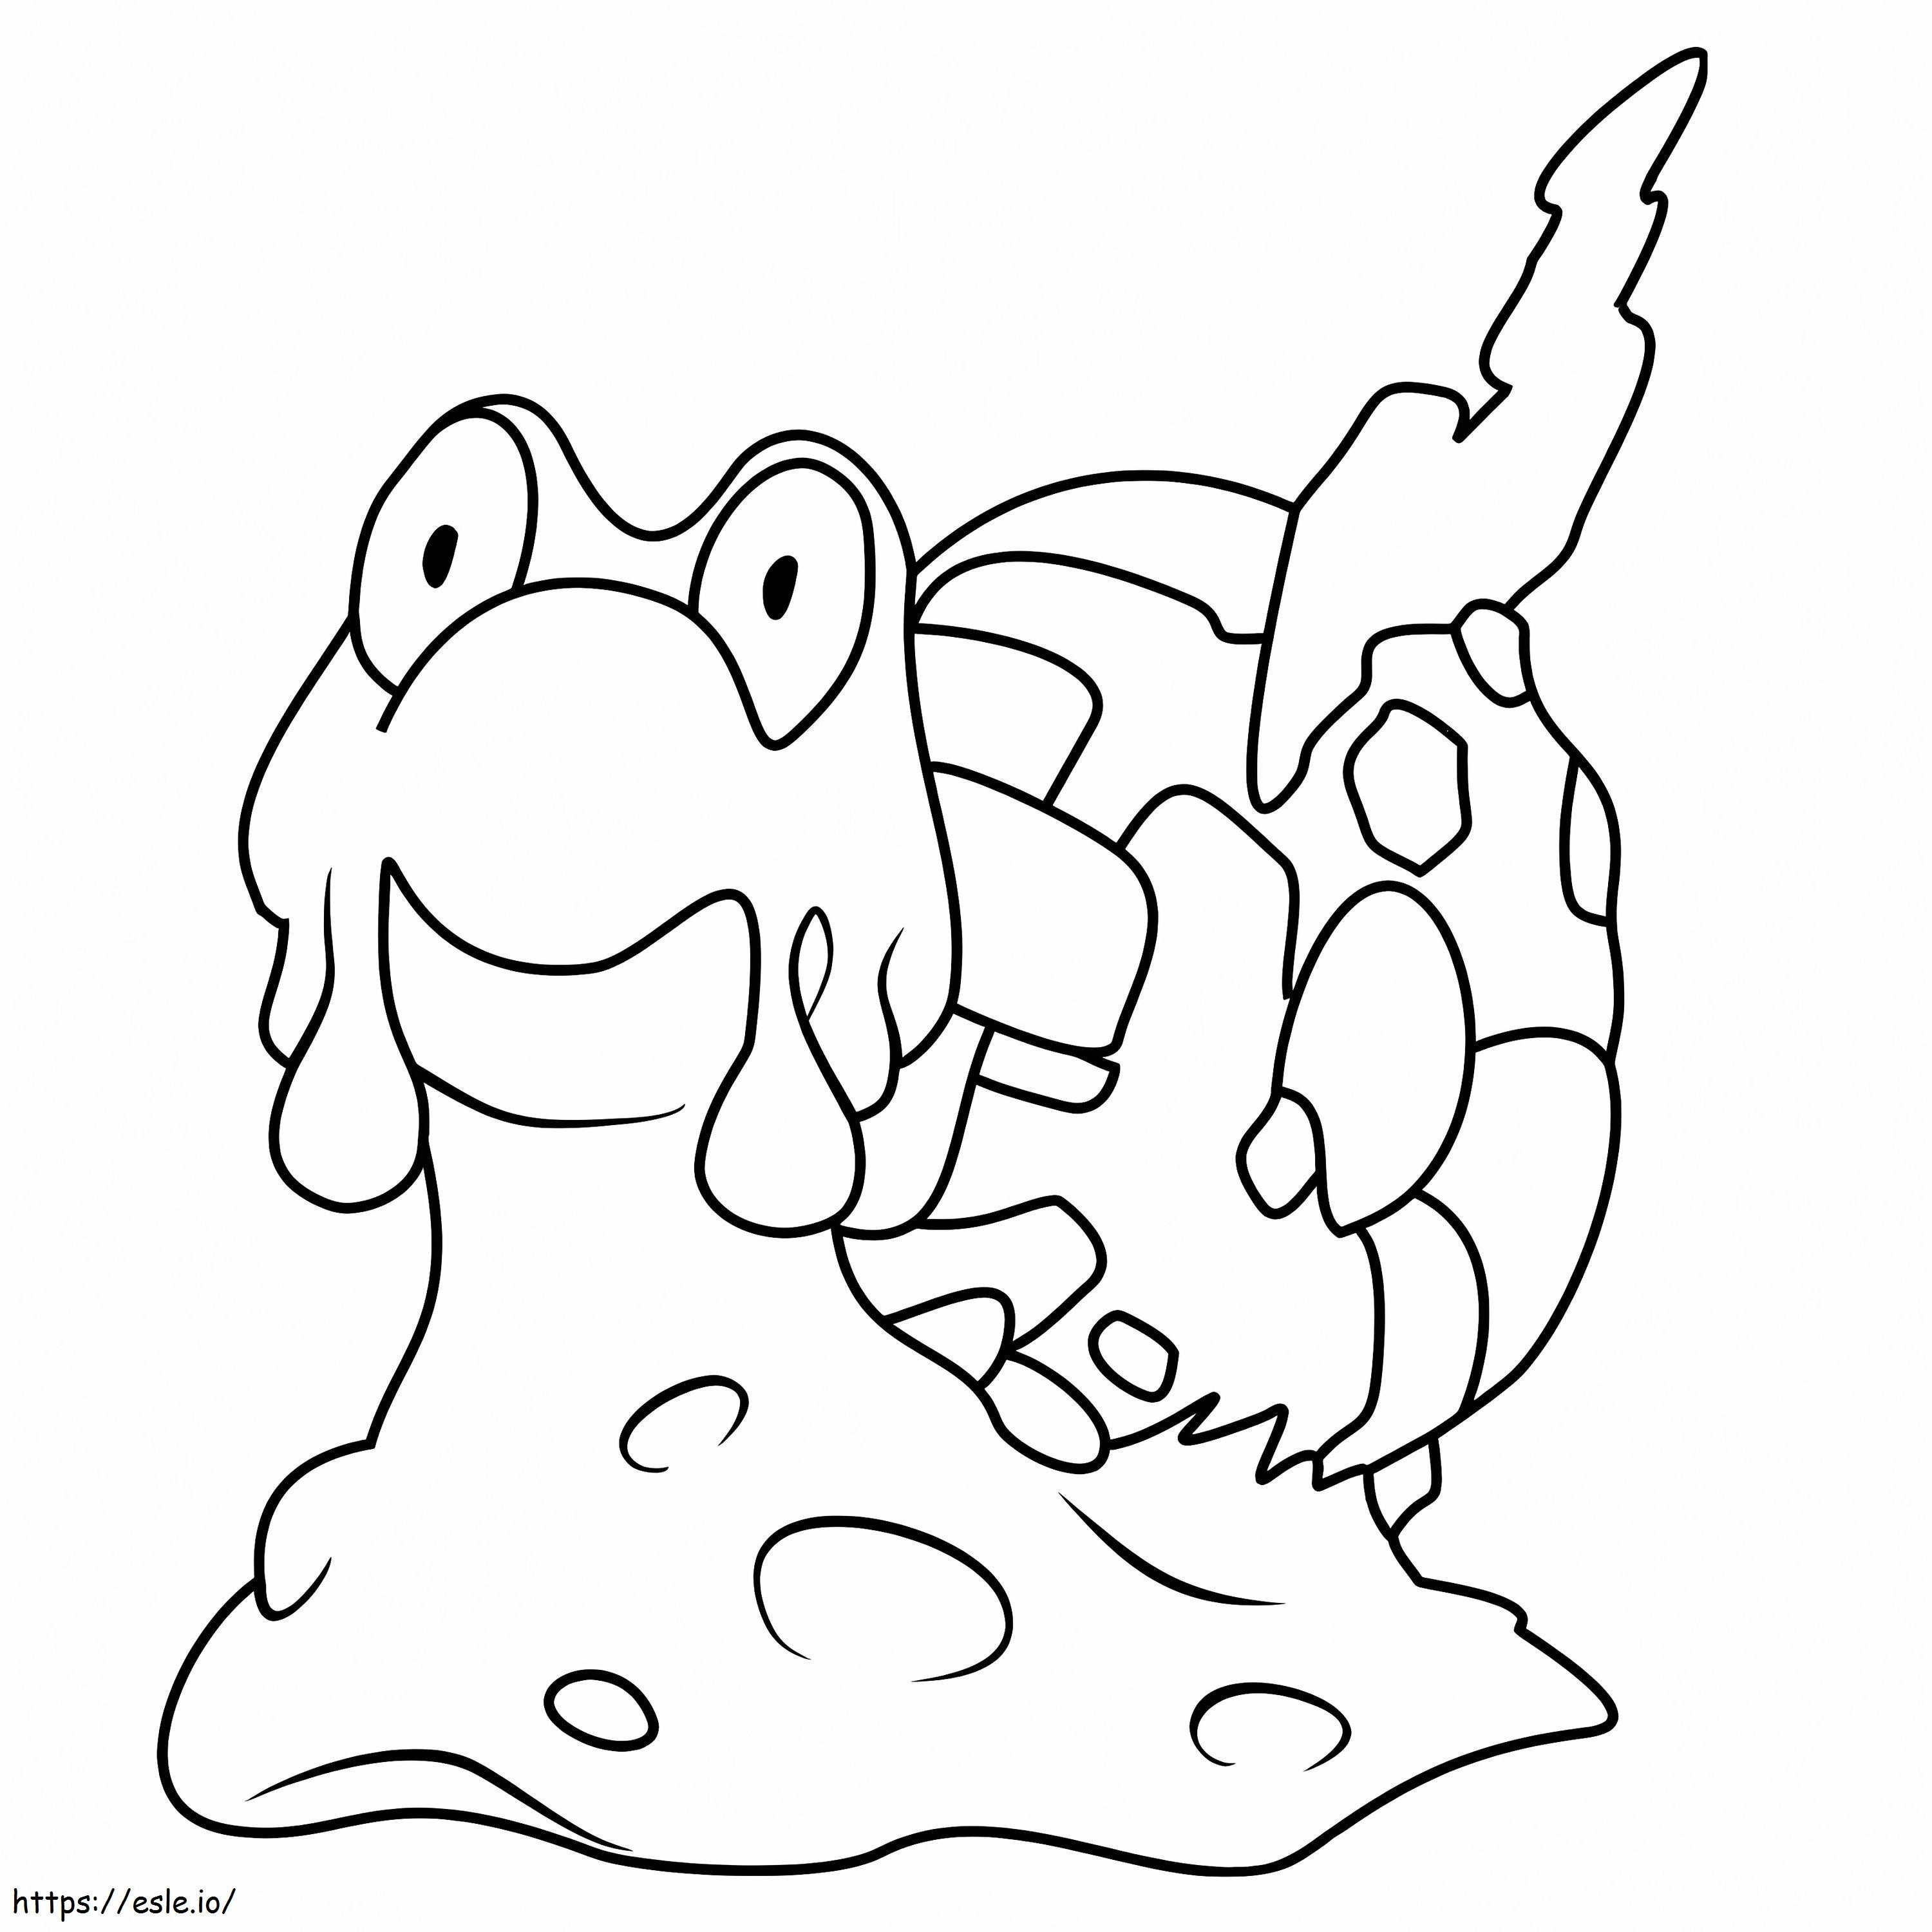 Load 1 coloring page